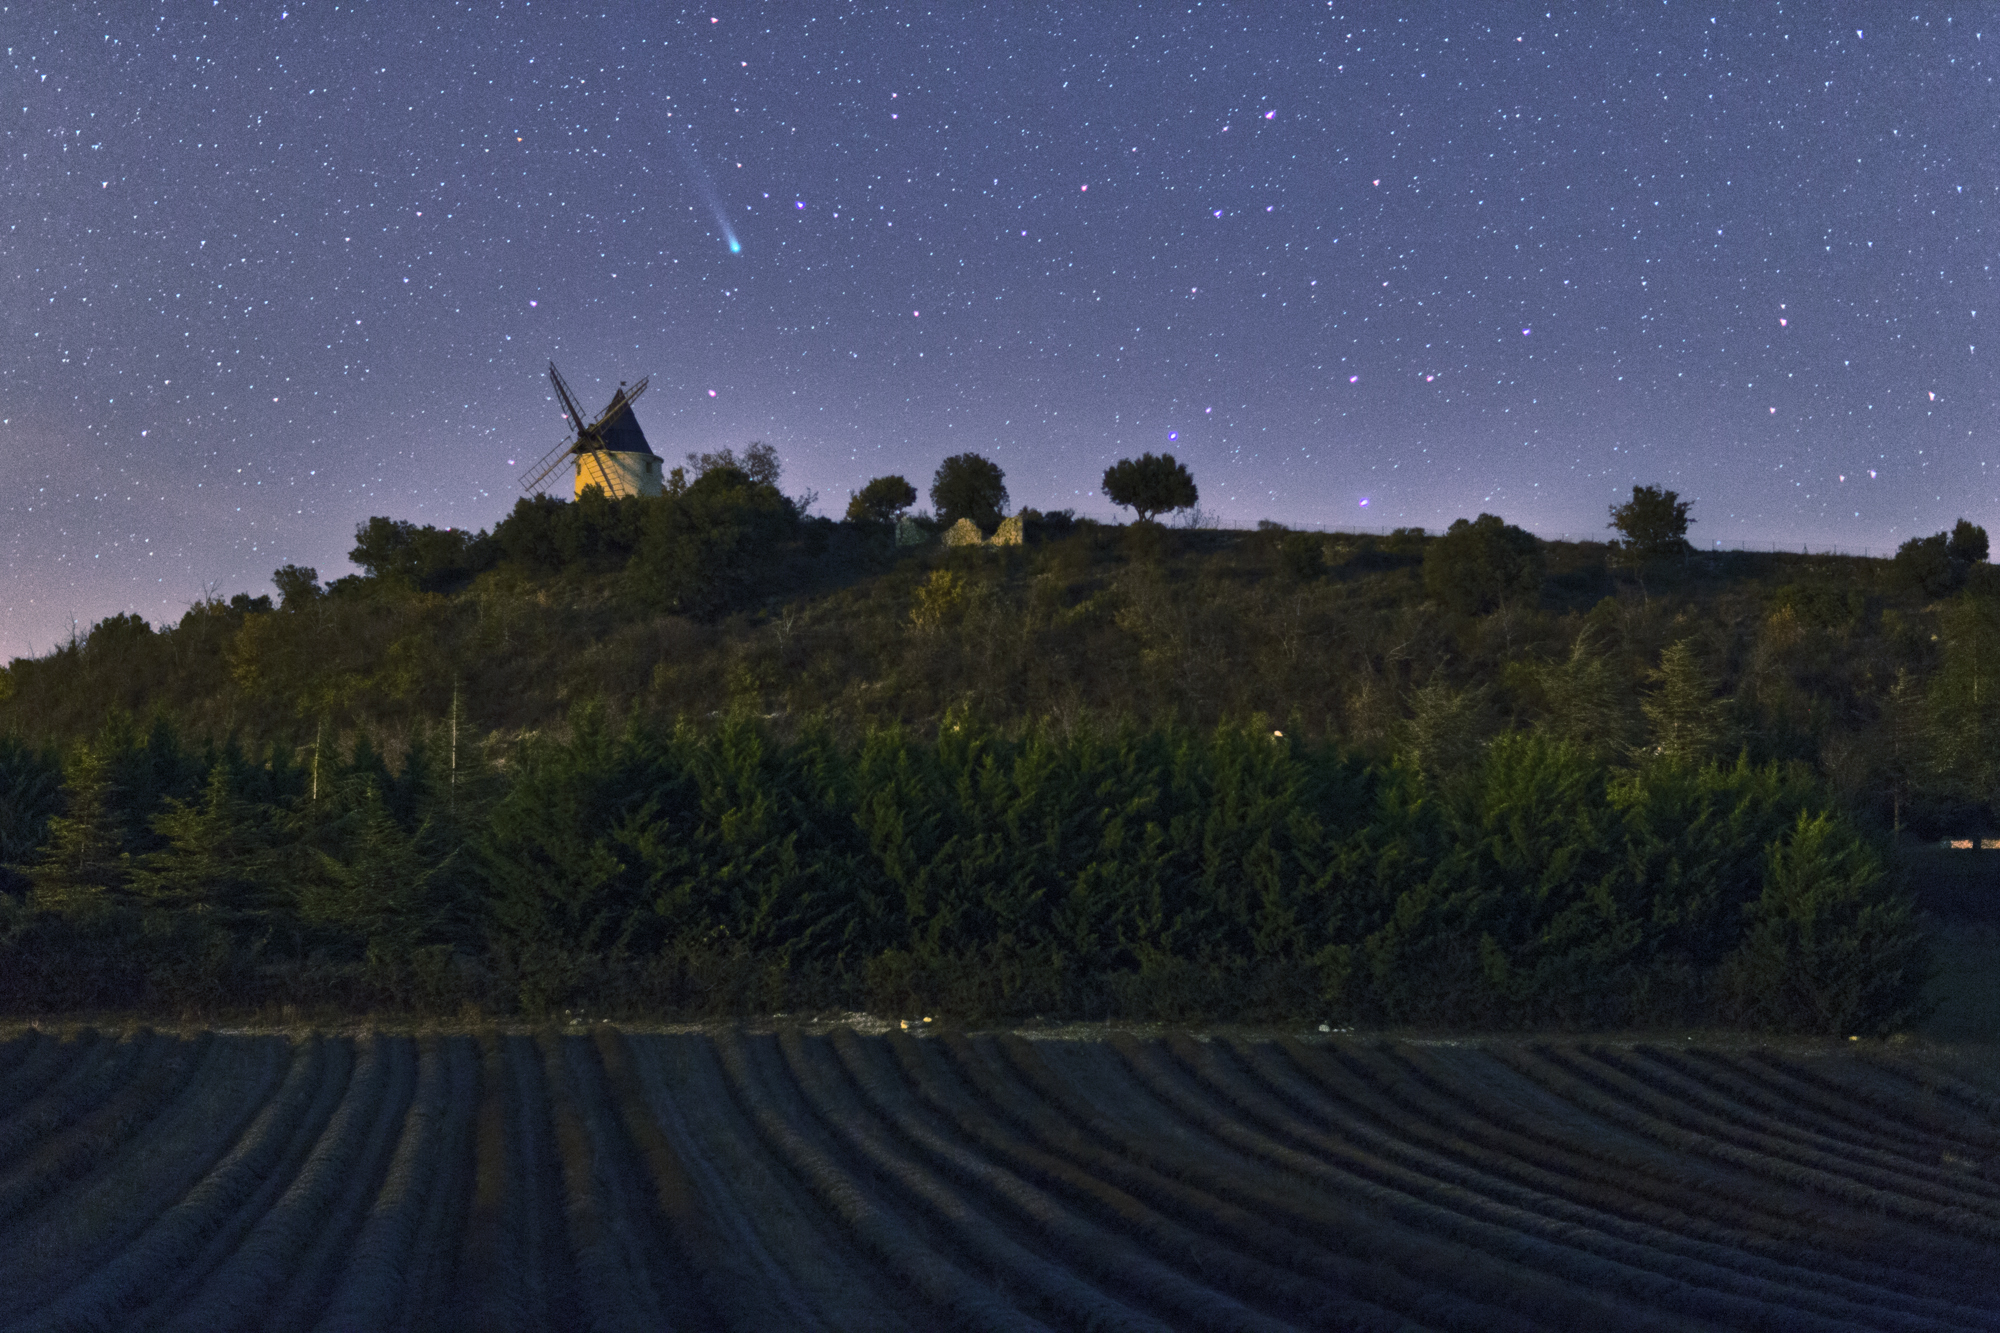 Comet Lovejoy over a Windmill